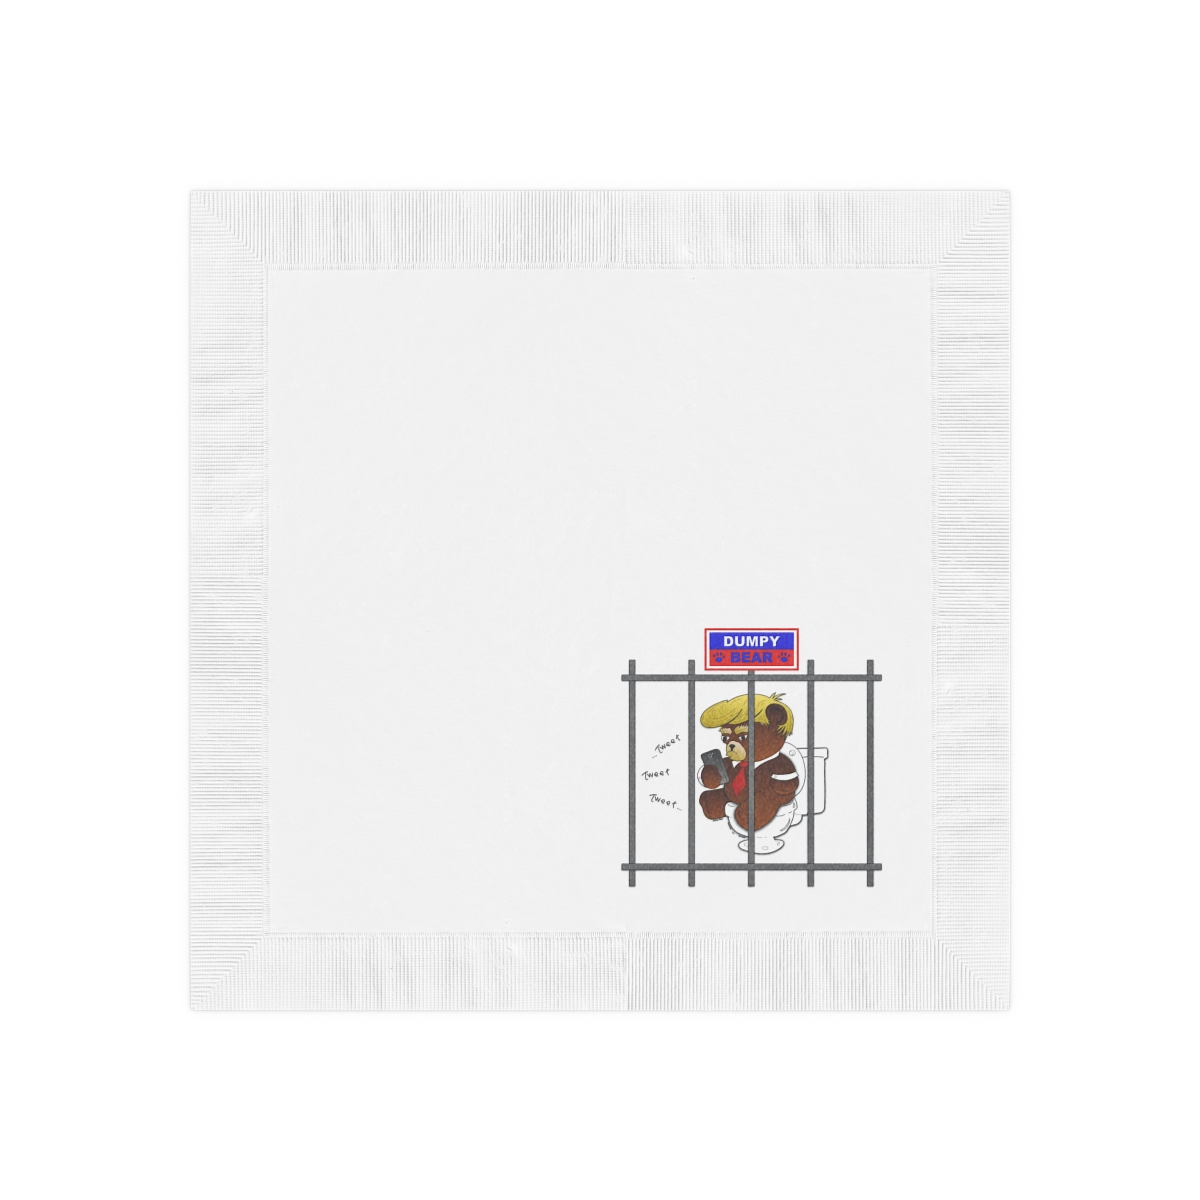 Dumpy Bear Tweeting on Toilet Behind Bars - White Coined Napkins product thumbnail image